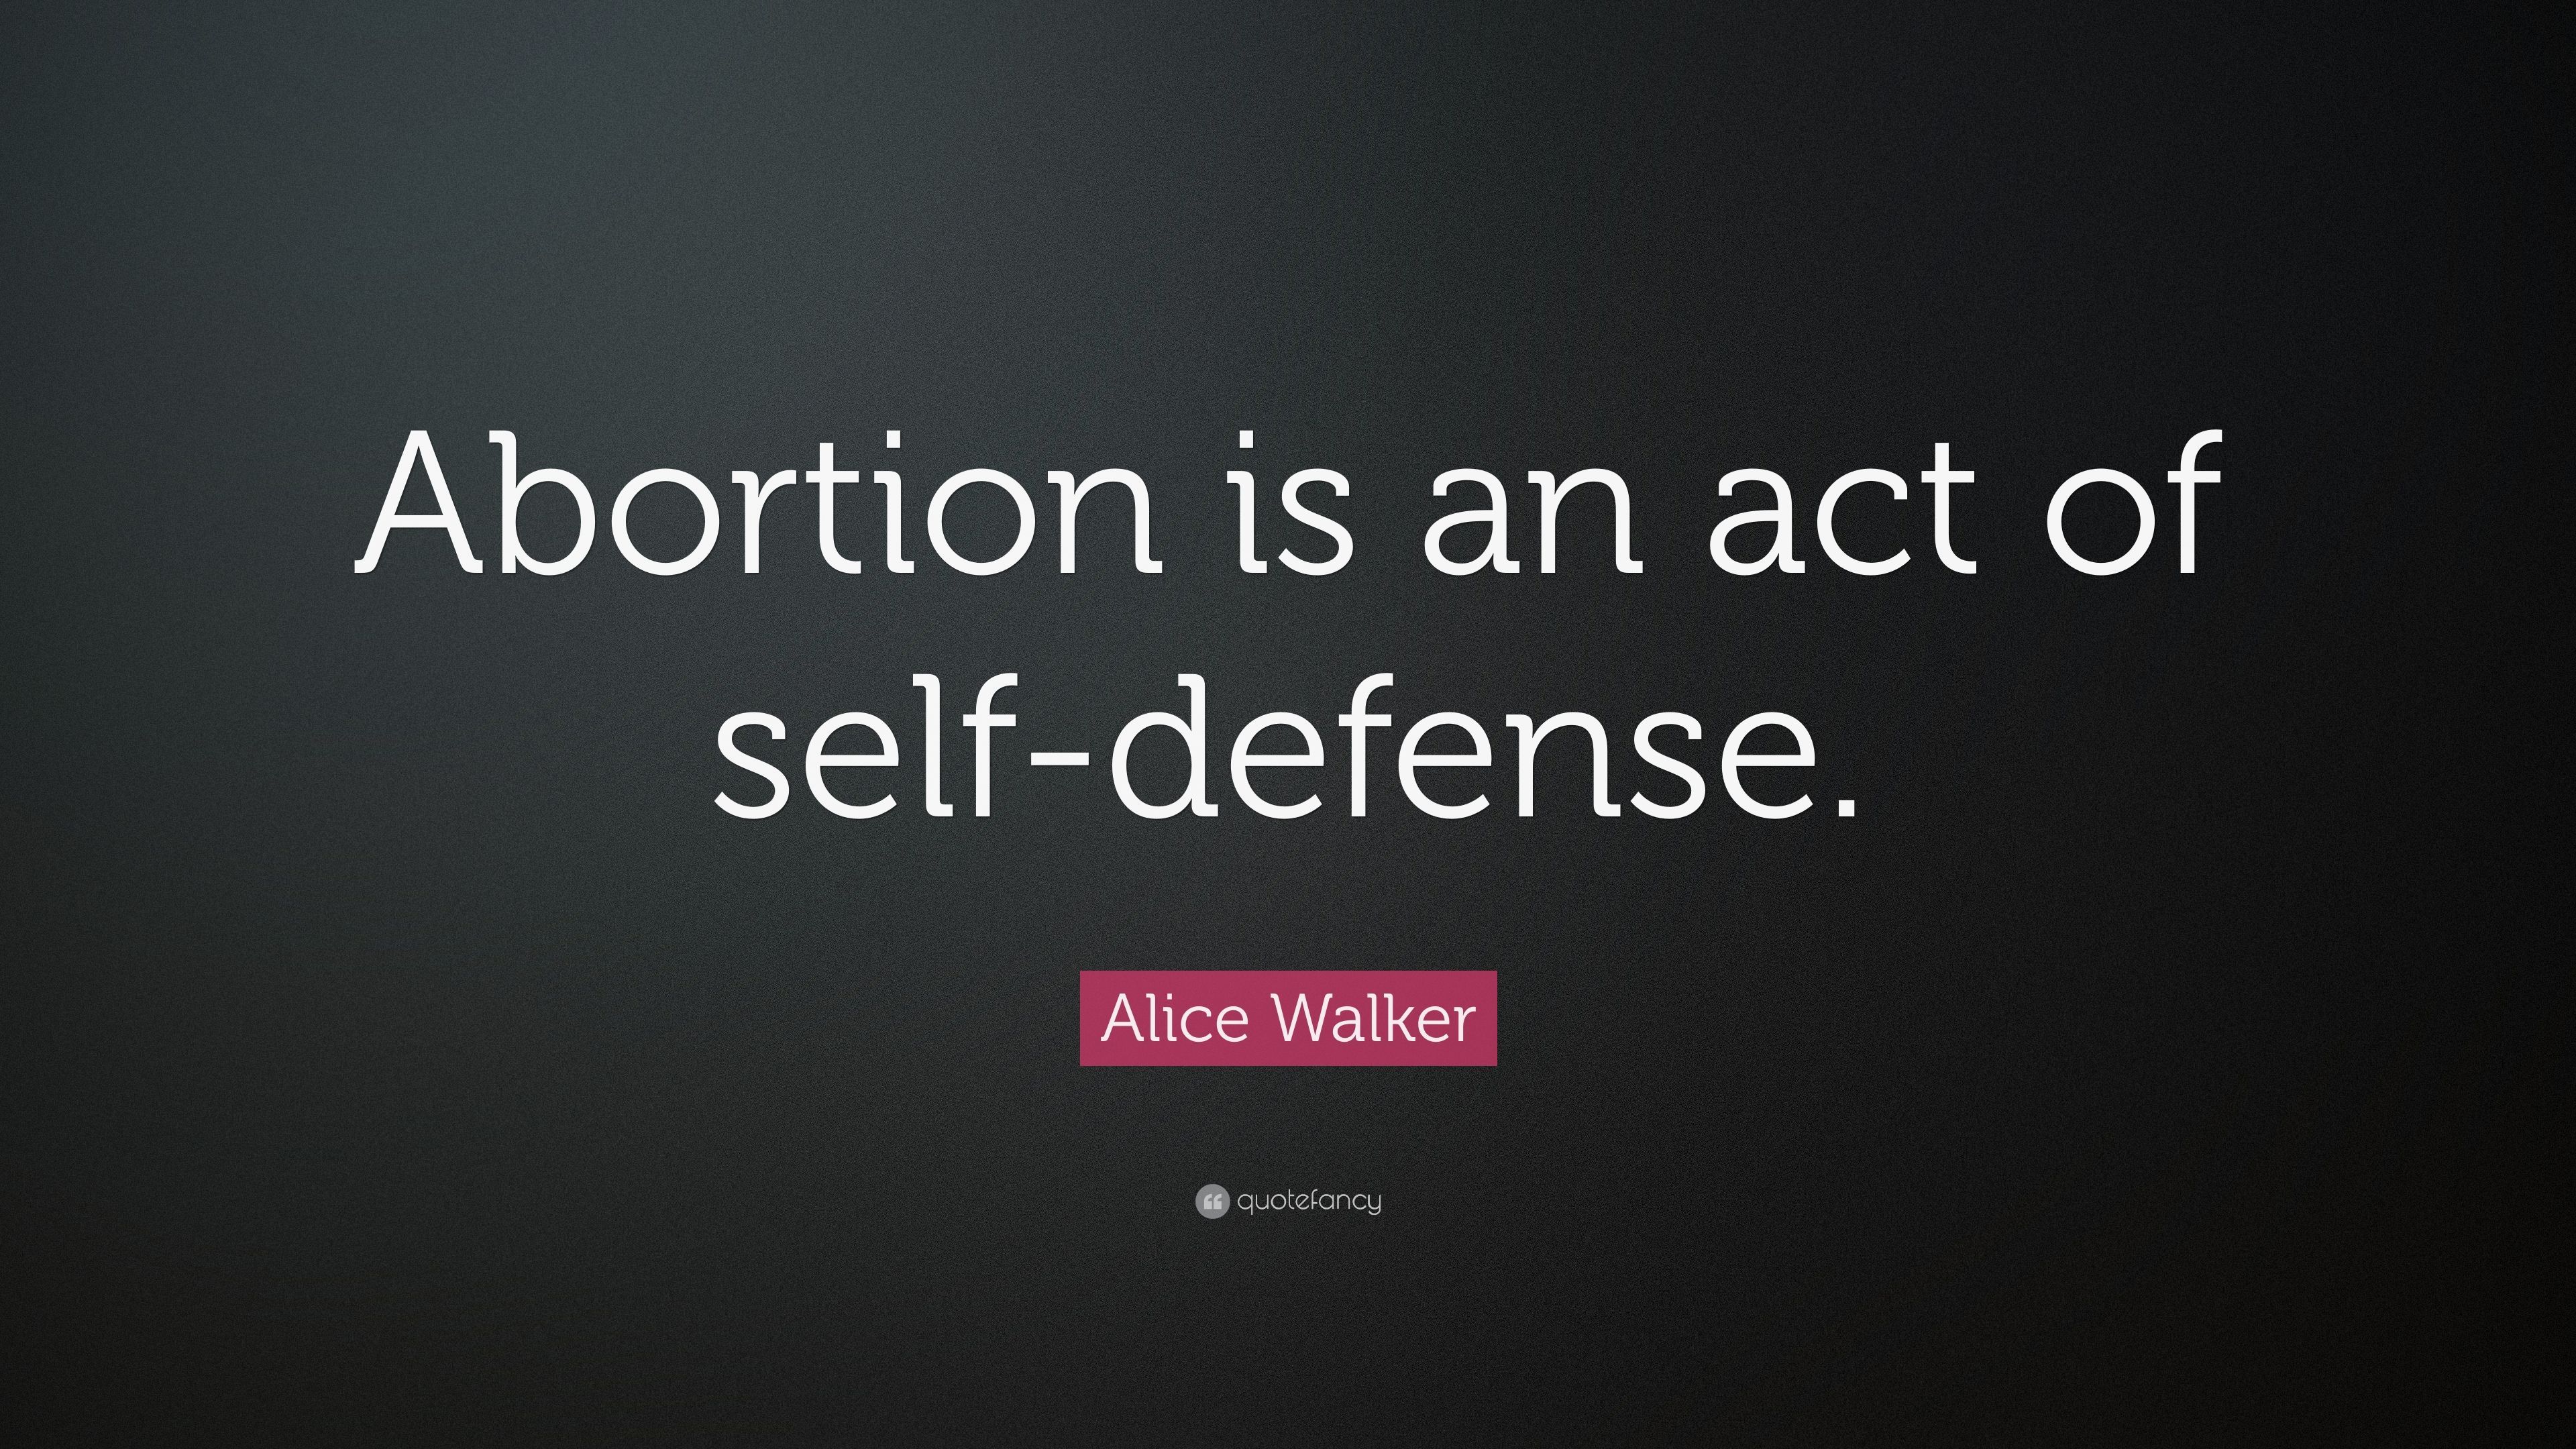 Alice Walker Quote: “Abortion Is An Act Of Self Defense.” (7 Wallpaper)